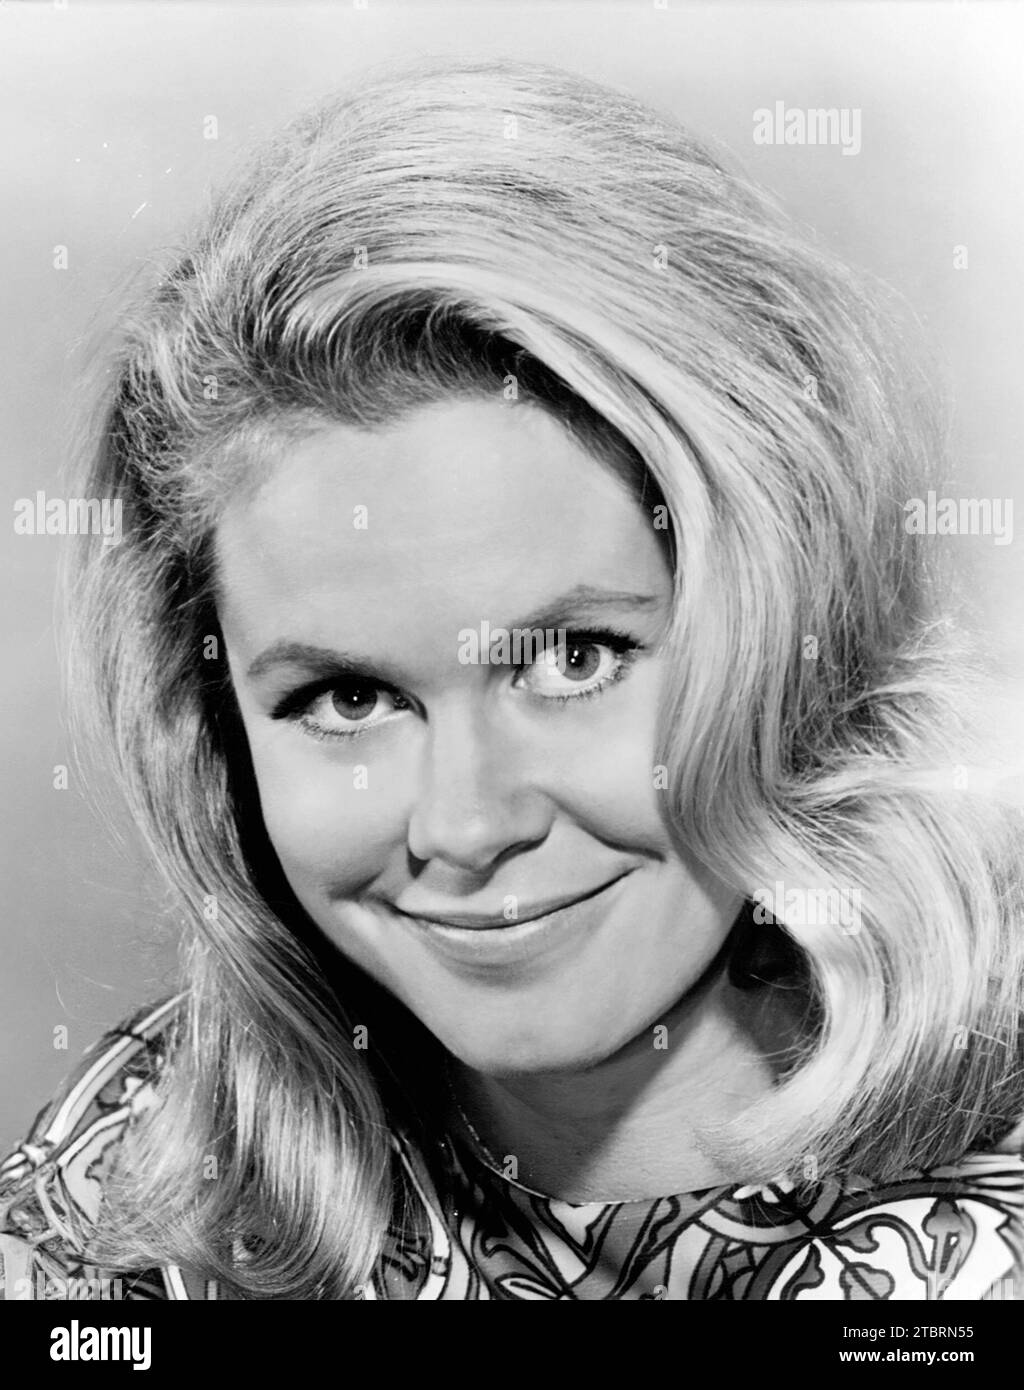 Elizabeth Montgomery. Portrait of the American actress, famous for her role in the TV series Bewitched, Elizabeth Victoria Montgomery (1933-1995), publicity photo, c. 1967 Stock Photo